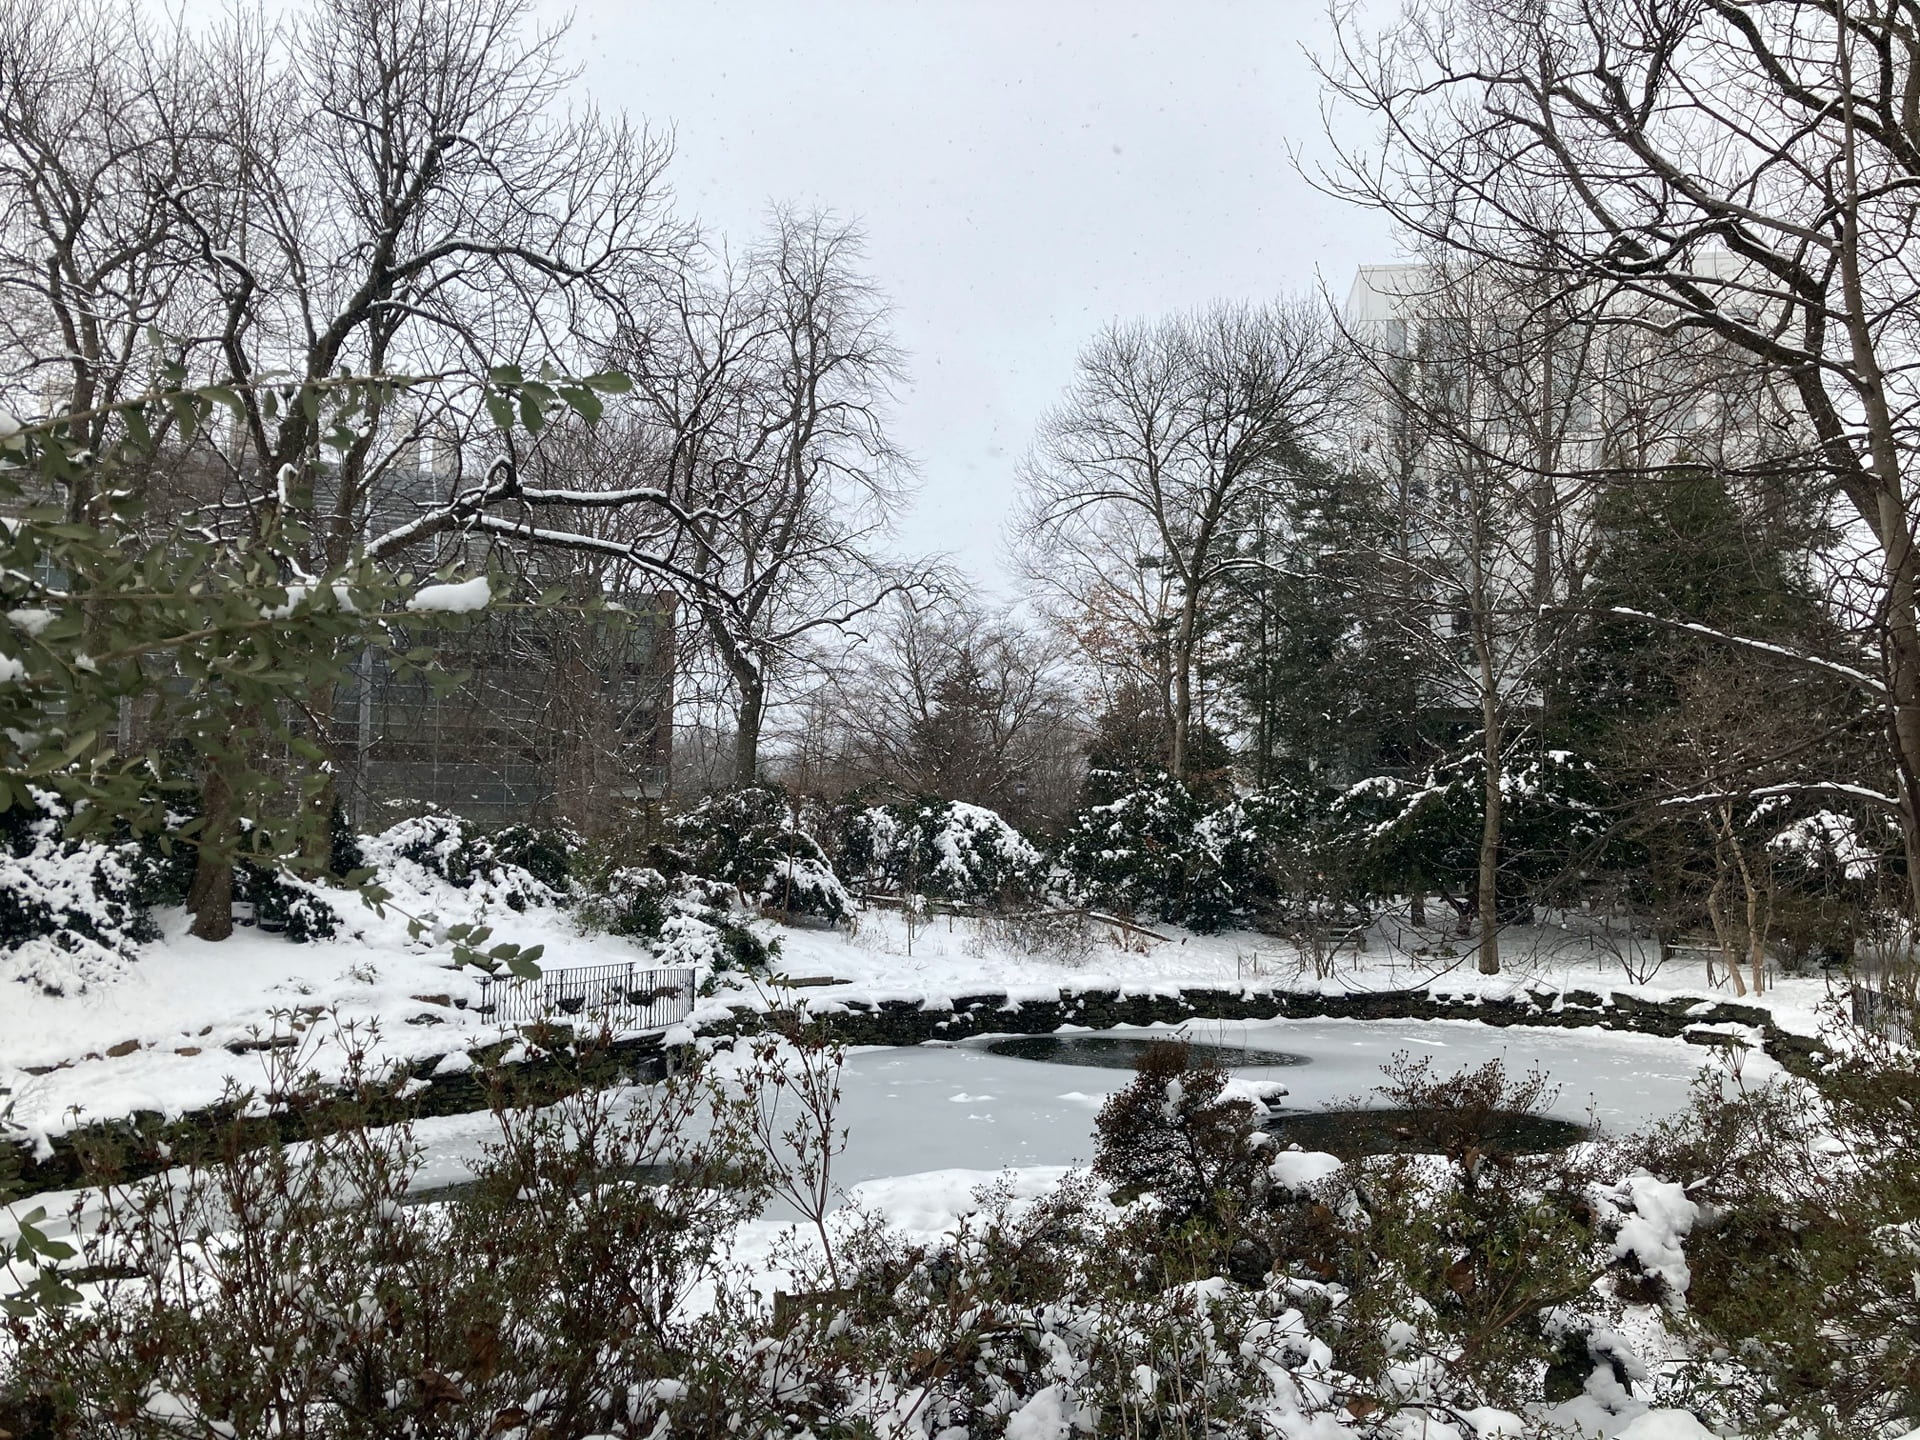 An icy BioPond, seen from above in the Woodland Garden.